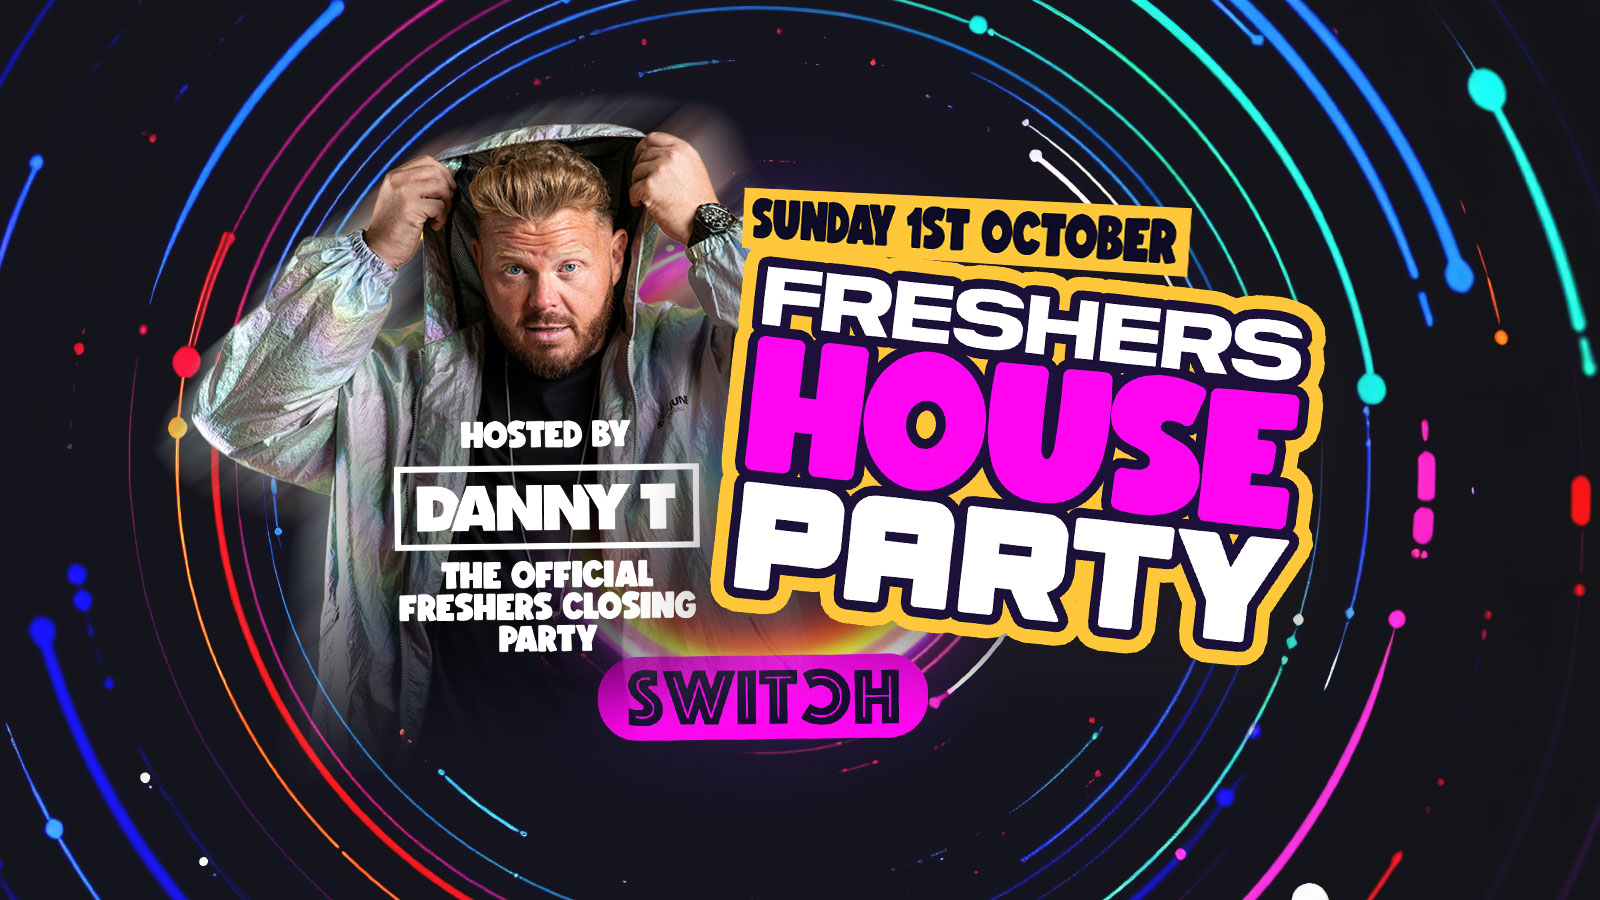 Official Freshers CLOSING PARTY | Danny T Takeover!